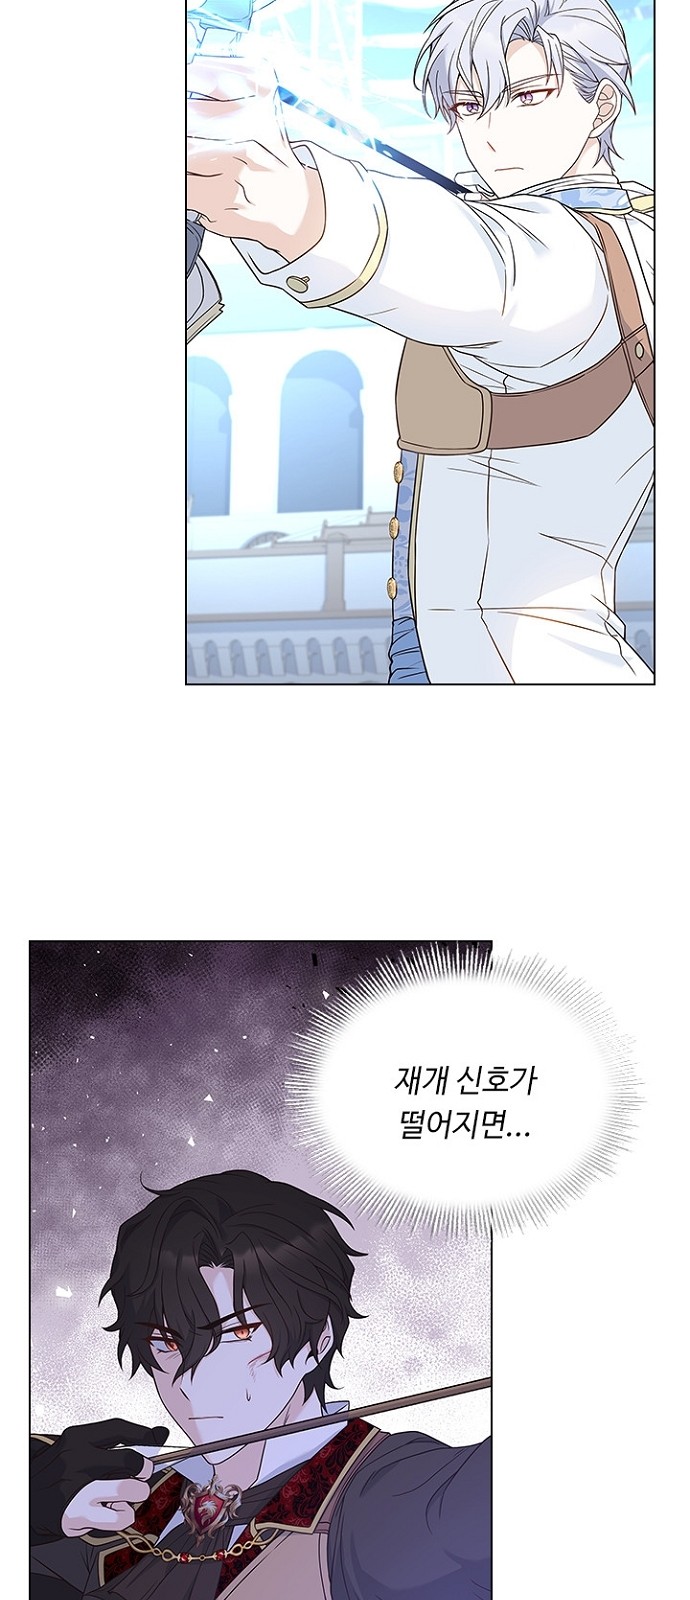 His Majesty's Proposal (A Night With the Emperor) - Chapter 57 - Page 6